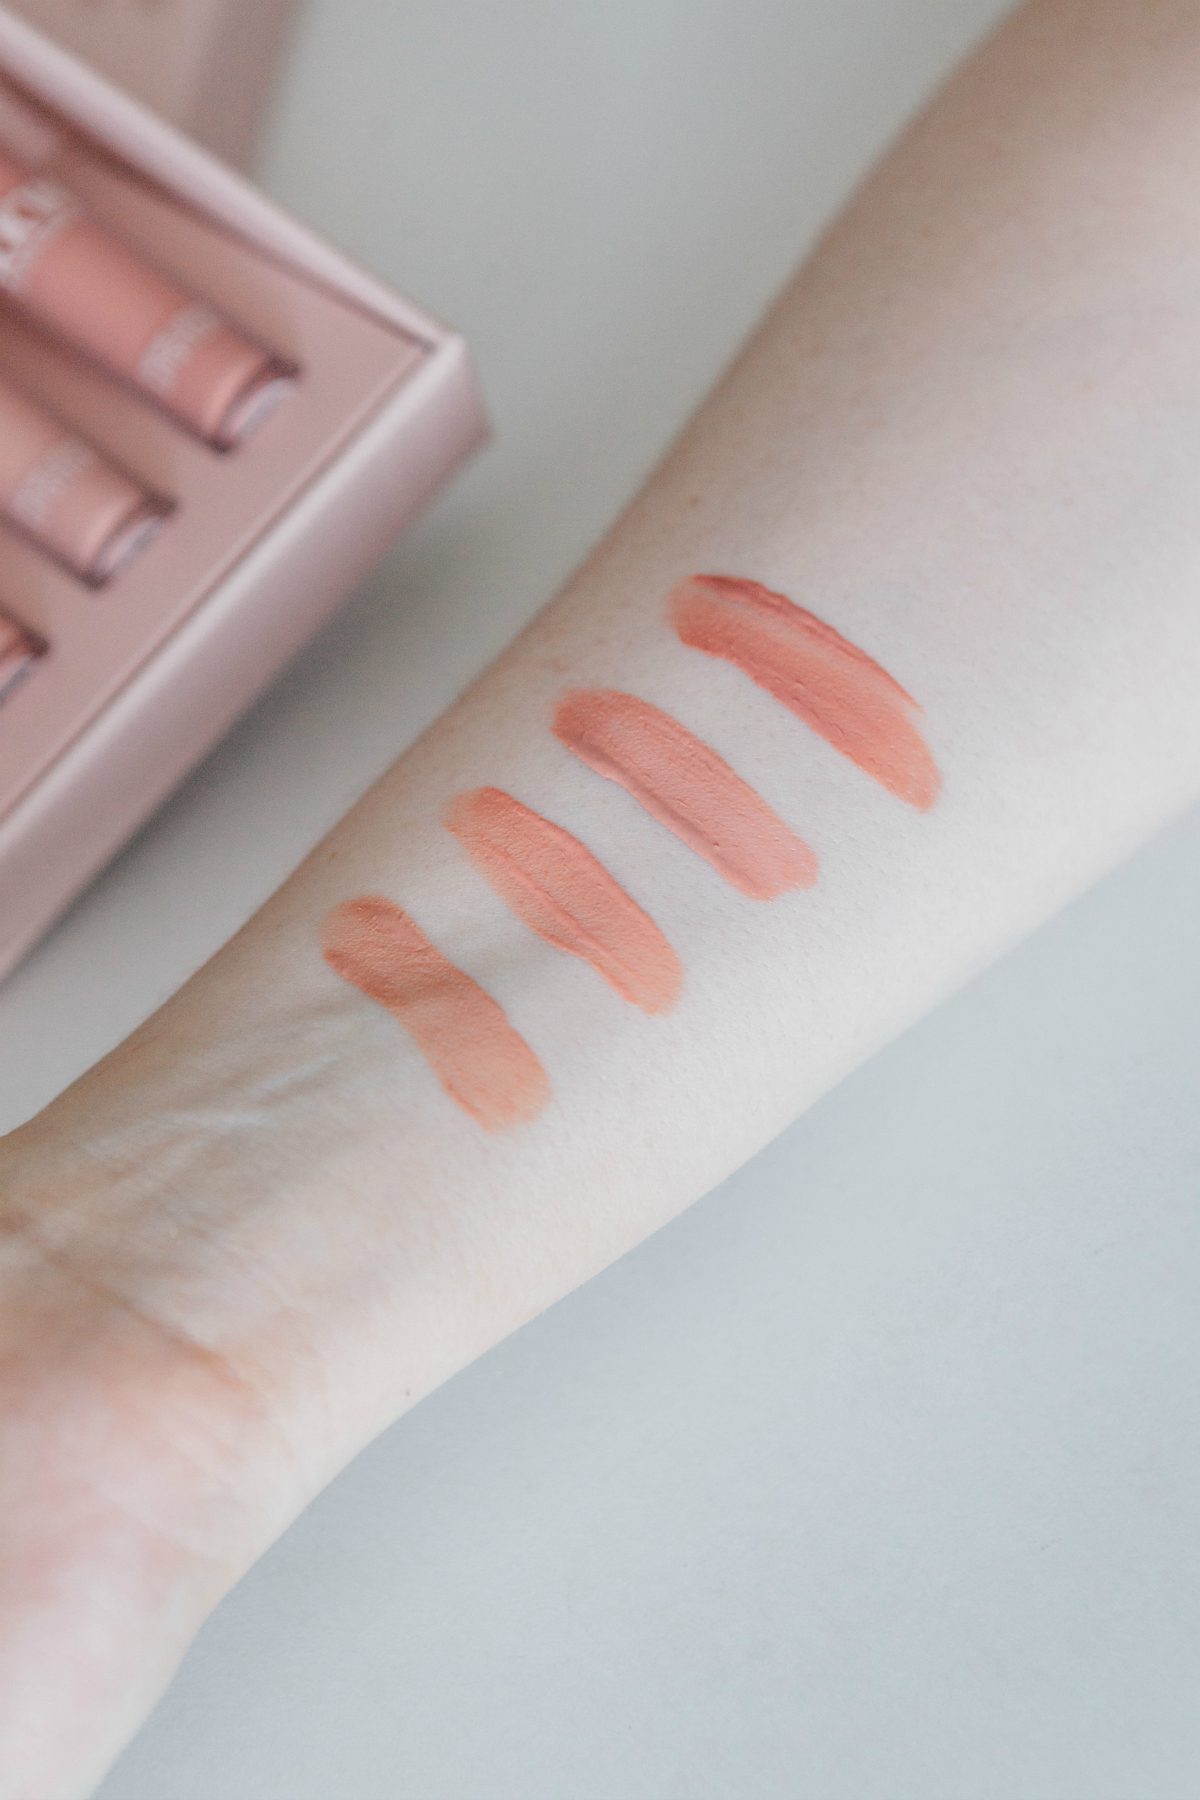 swatch of KKW by Kylie Cosmetics Creme Liquid Lipstick